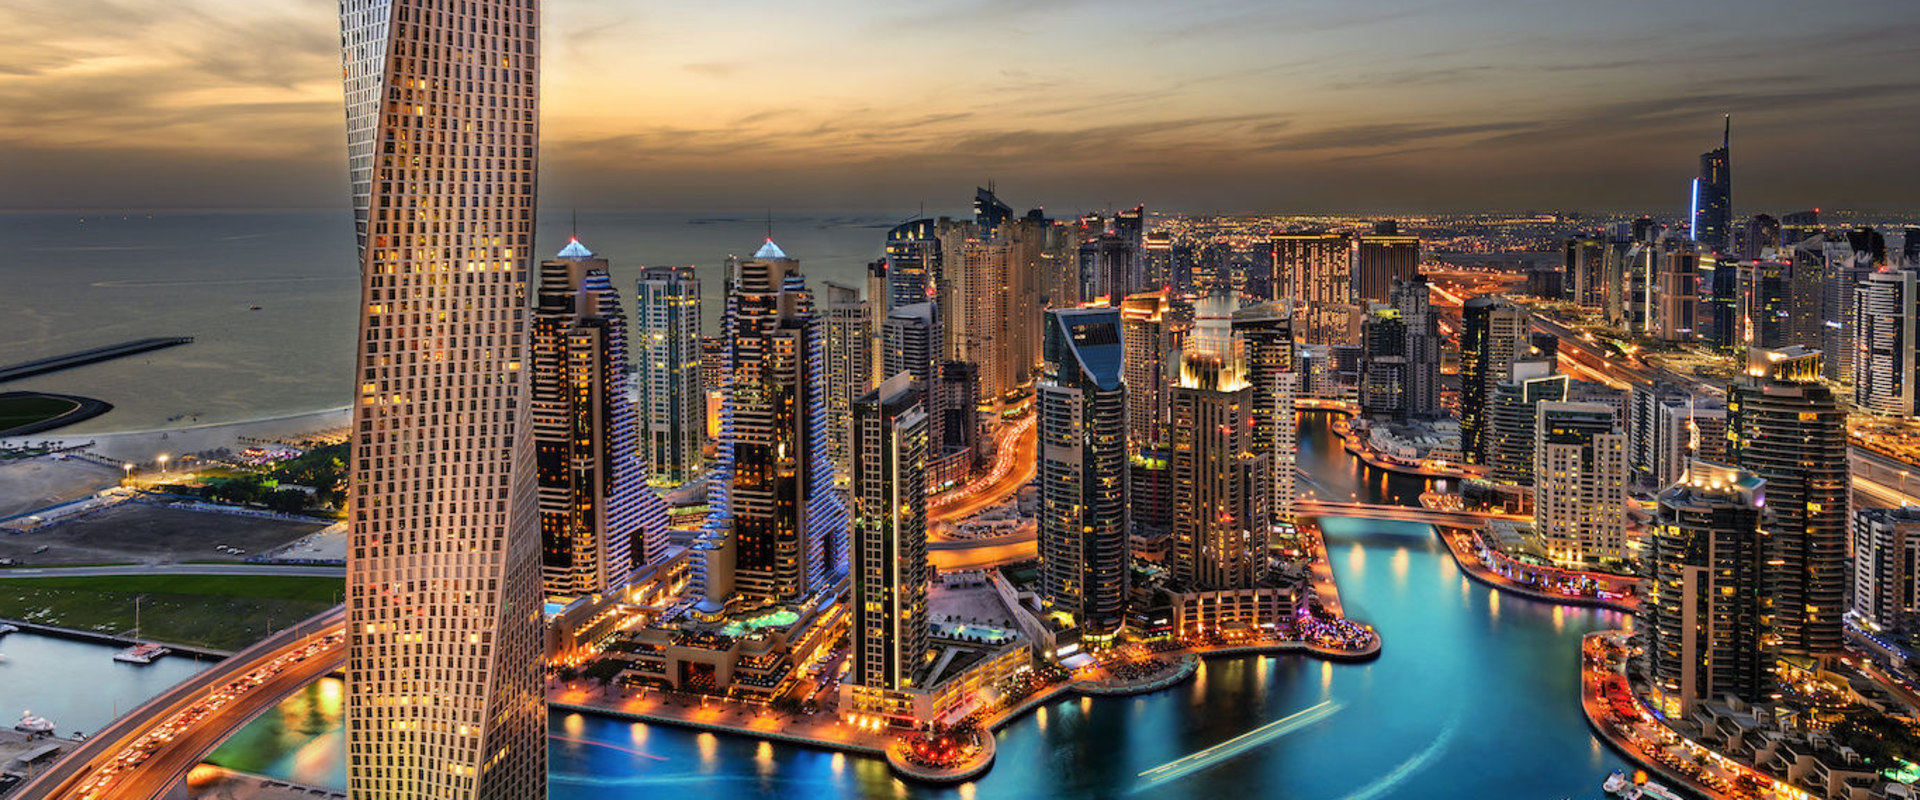 Do I Need to Register My Company with the DTCM in Dubai?